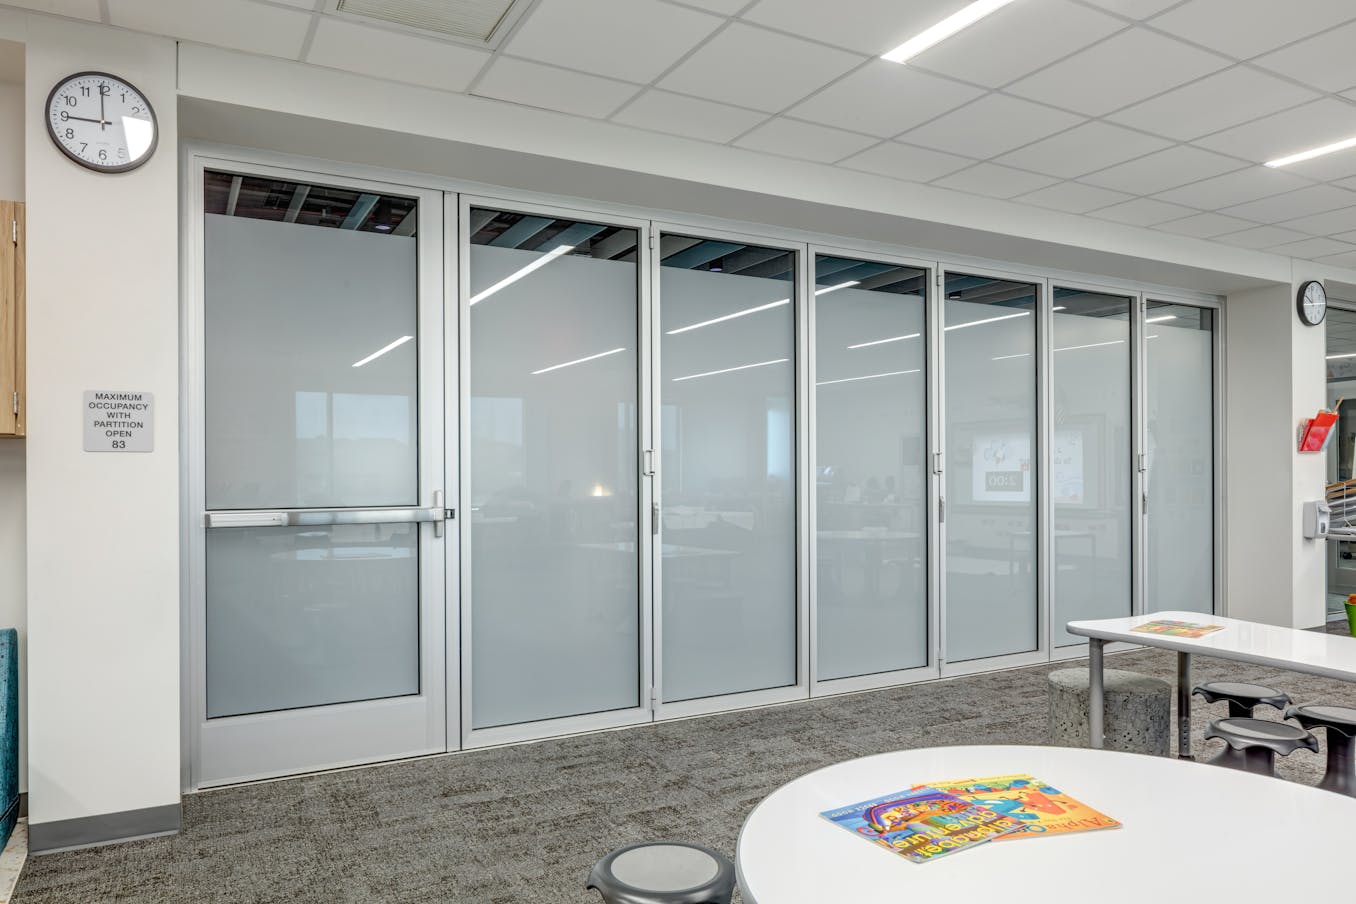 A classroom featuring frosted glass doors and a clock with the highest quality hardware